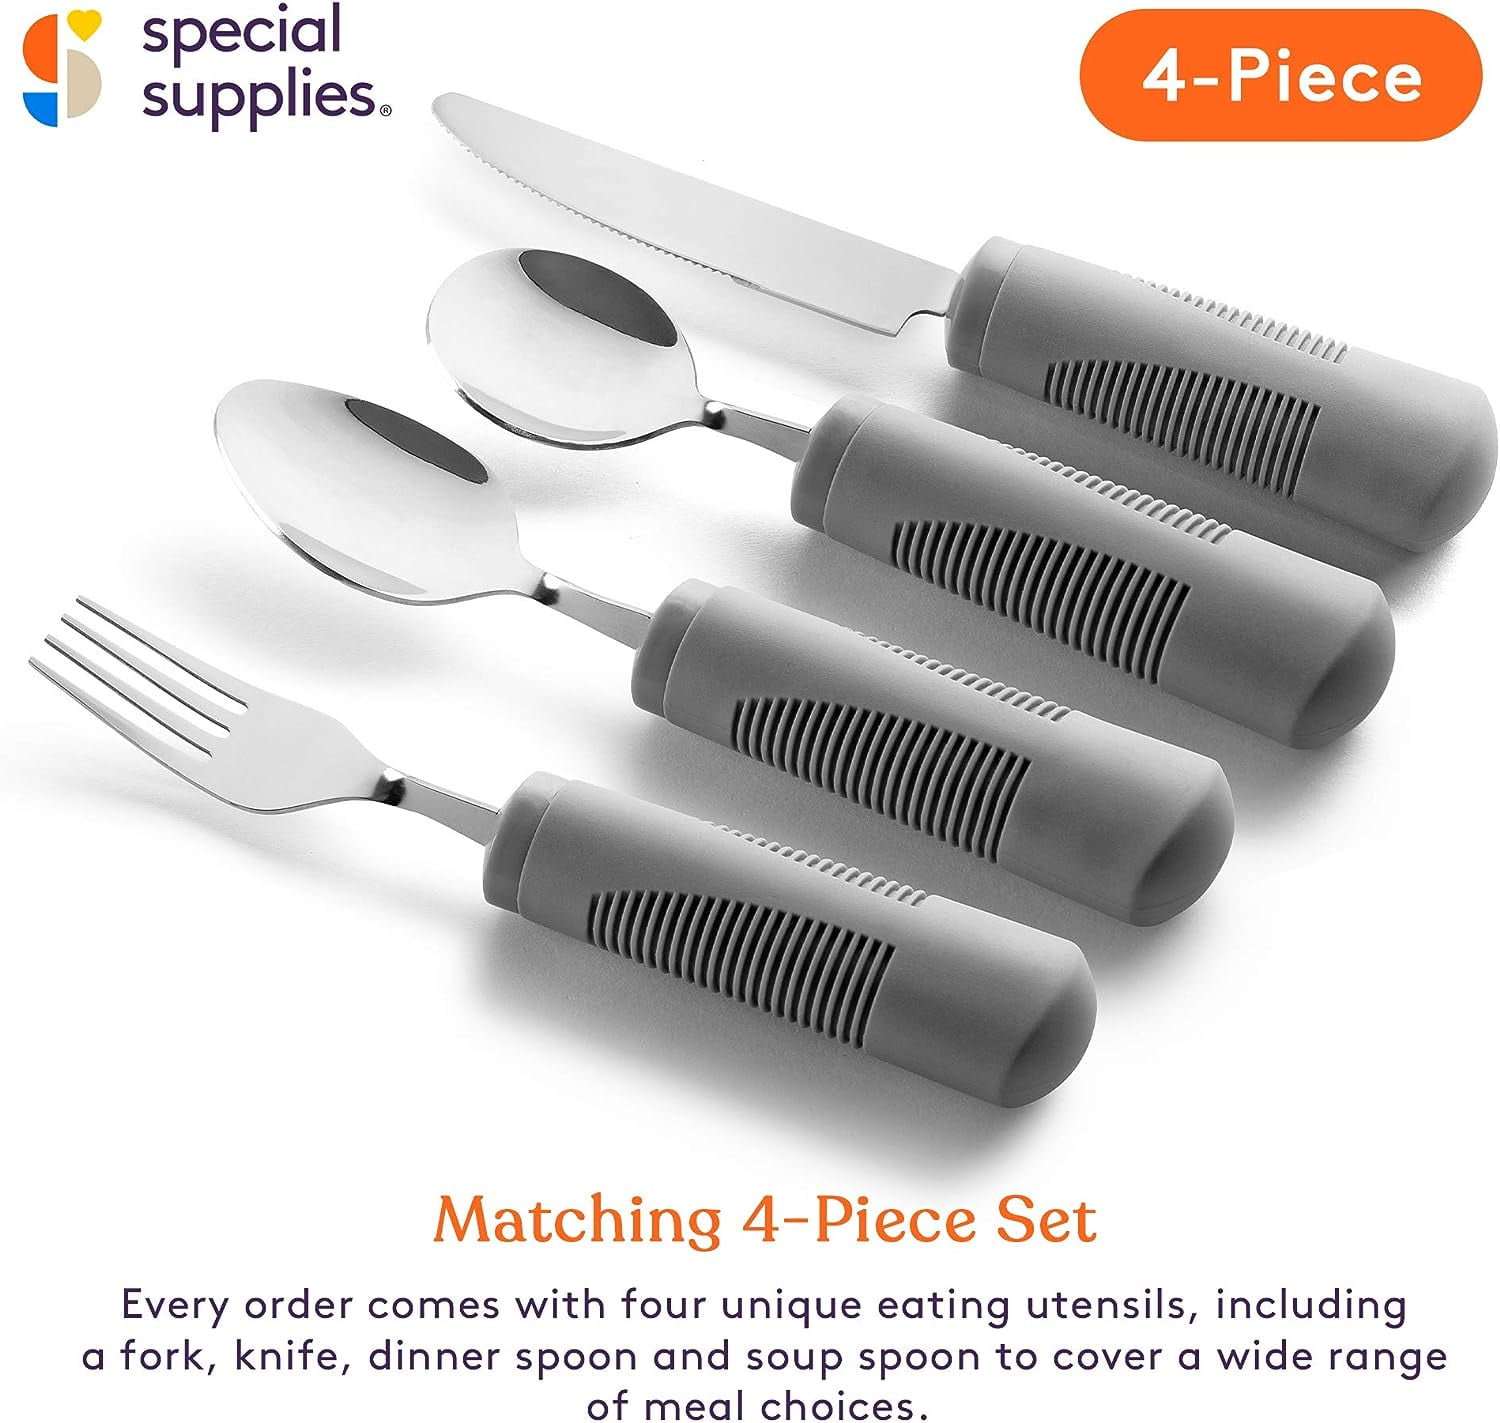 Adapted Kitchen Tools, Utensils, and Accessibility : NCHPAD